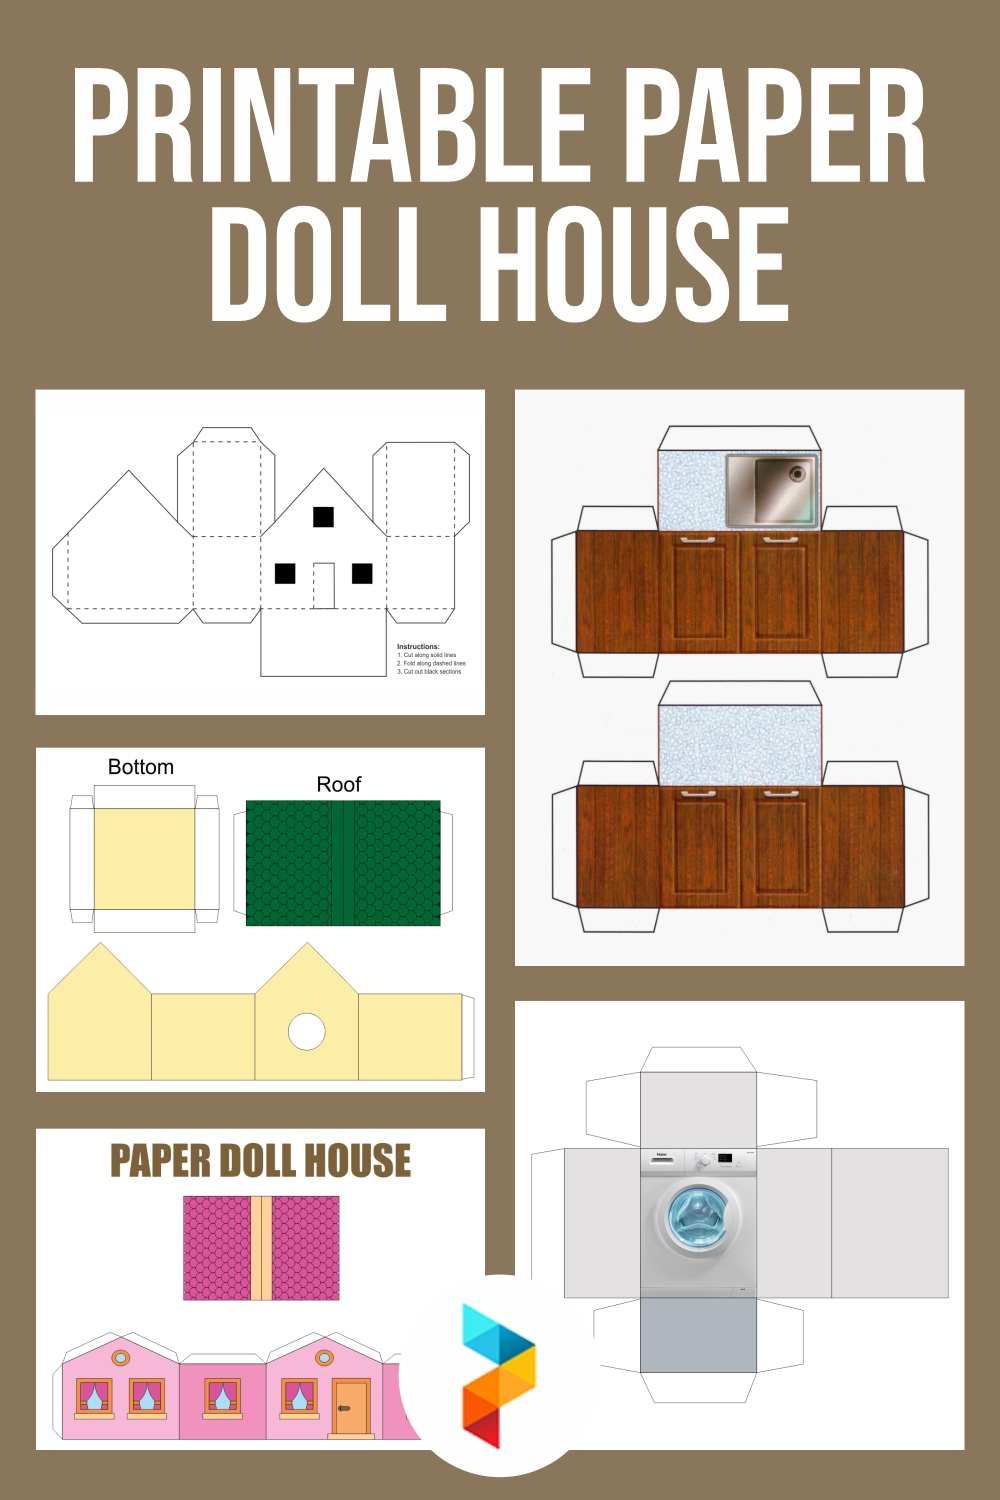 Home & Hobby Dollhouse Making Paper Dollhouse Furniture Paper Doll